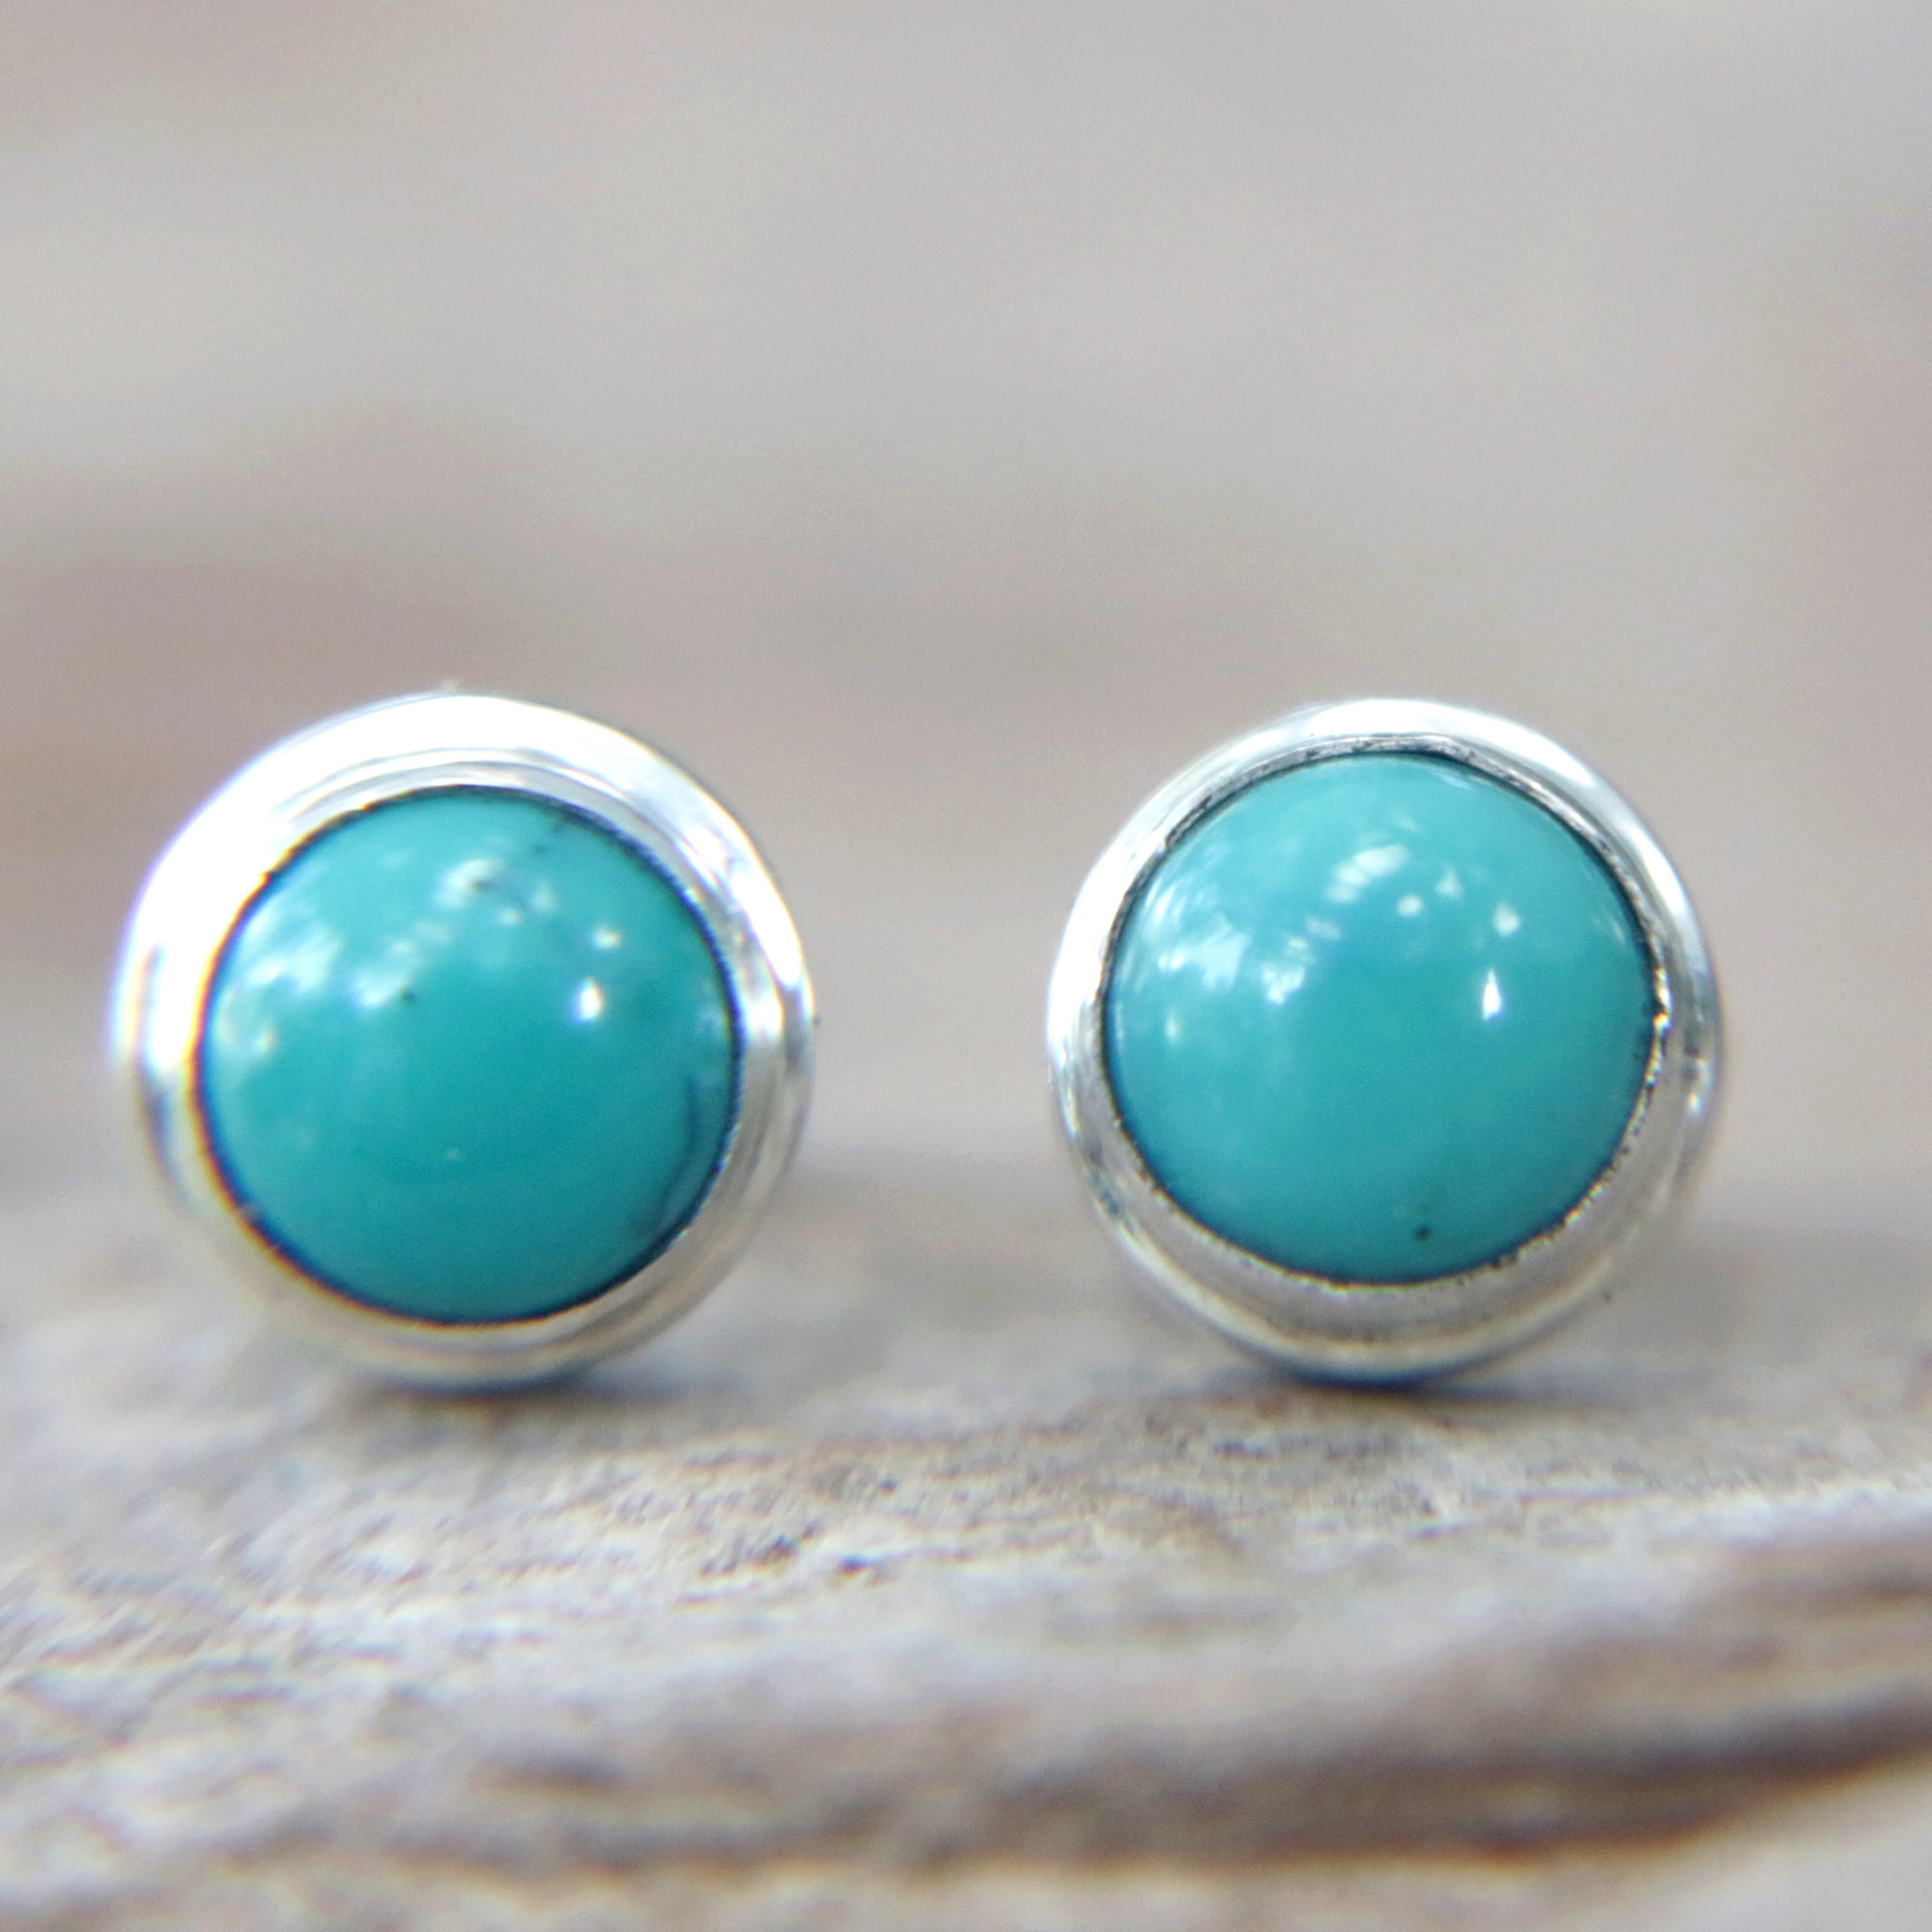 Reconstituted Turquoise Earrings